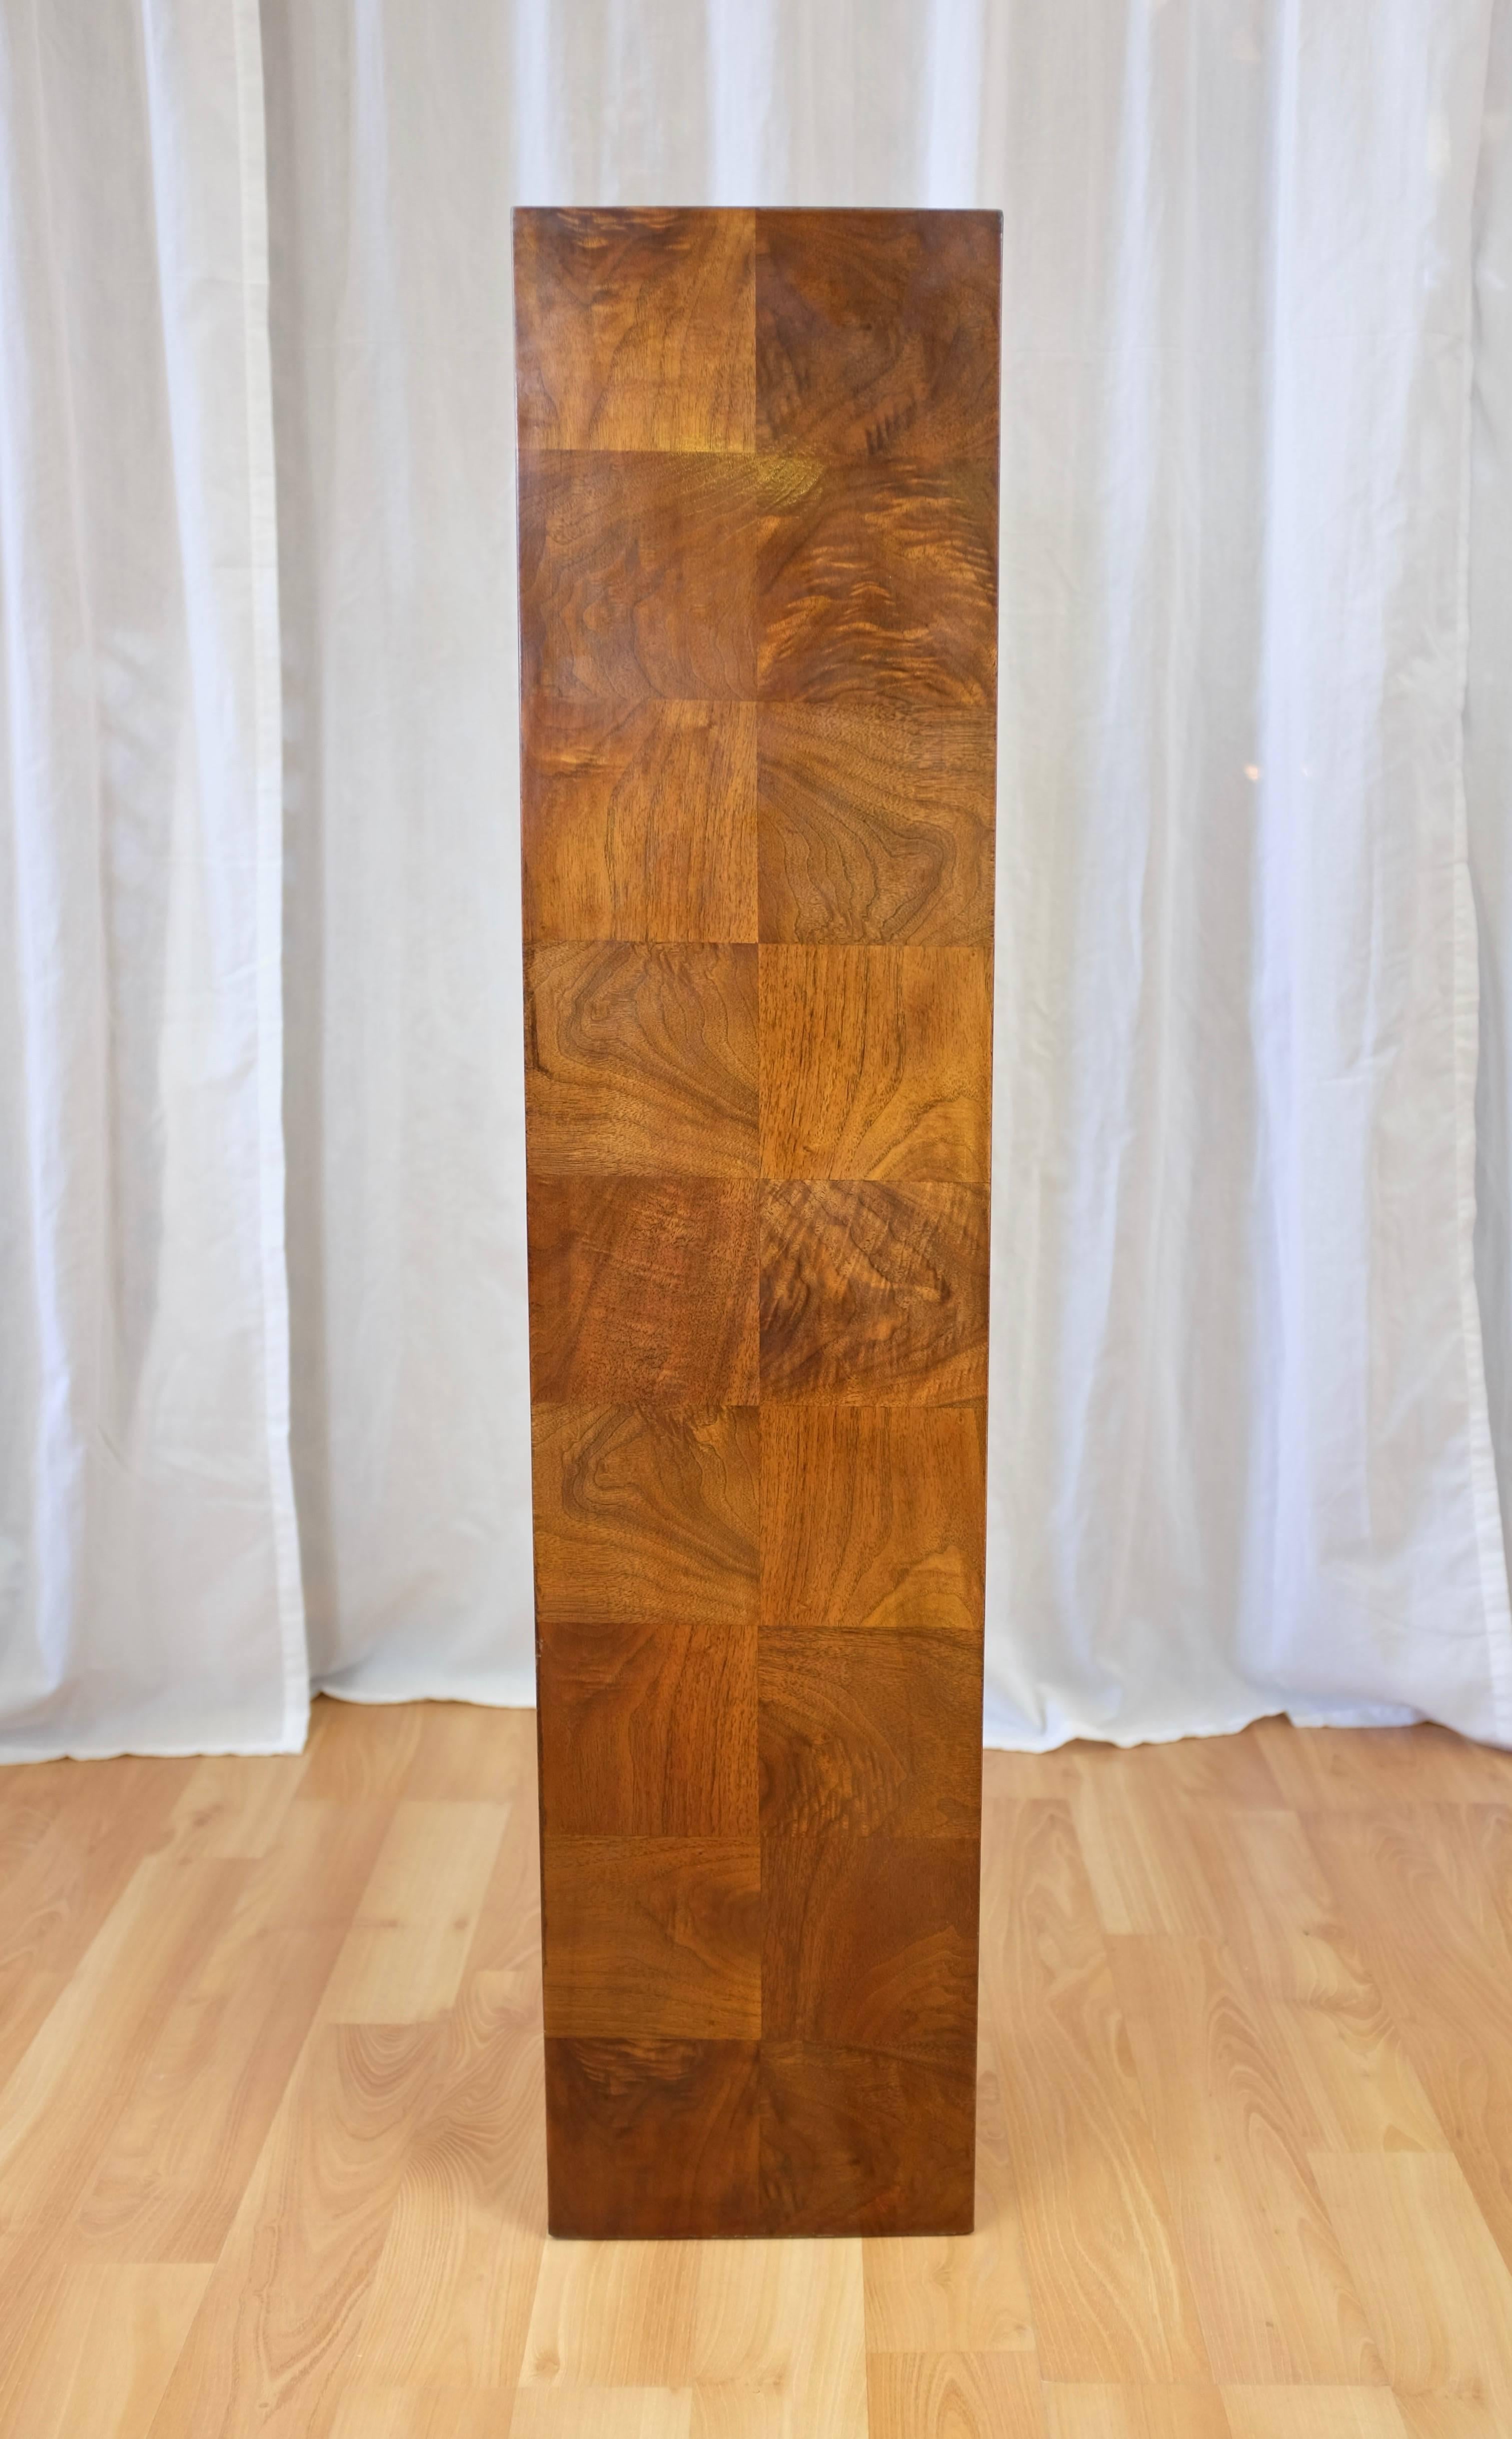 A circa-1970s tall walnut pedestal in the style of Milo Baughman.

Finished on all sides in lively figured crown cut walnut veneer squares with a bright, warm tone. An understated yet stately stage upon which to display a prized piece of art or